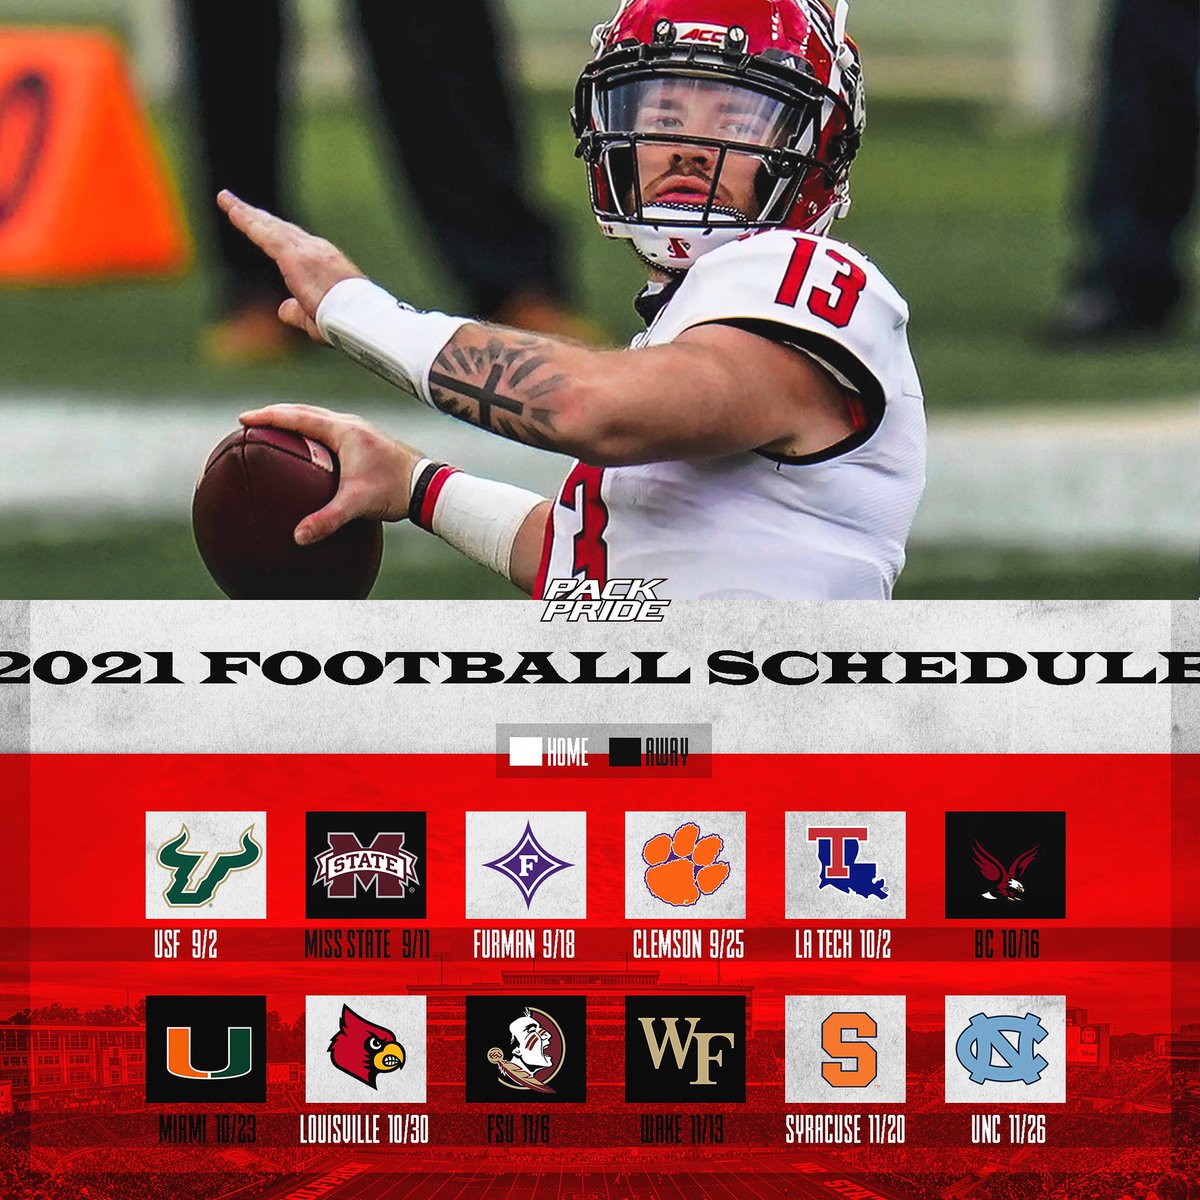 Nc State Football Schedule 2022 Pack Pride On Twitter: "🚨 The 2021 Nc State Football Schedule Is Out! 🚨  👇 Check Out The Full Breakdown Here 👇 Https://T.co/Pc2Ncbmpiz" / Twitter